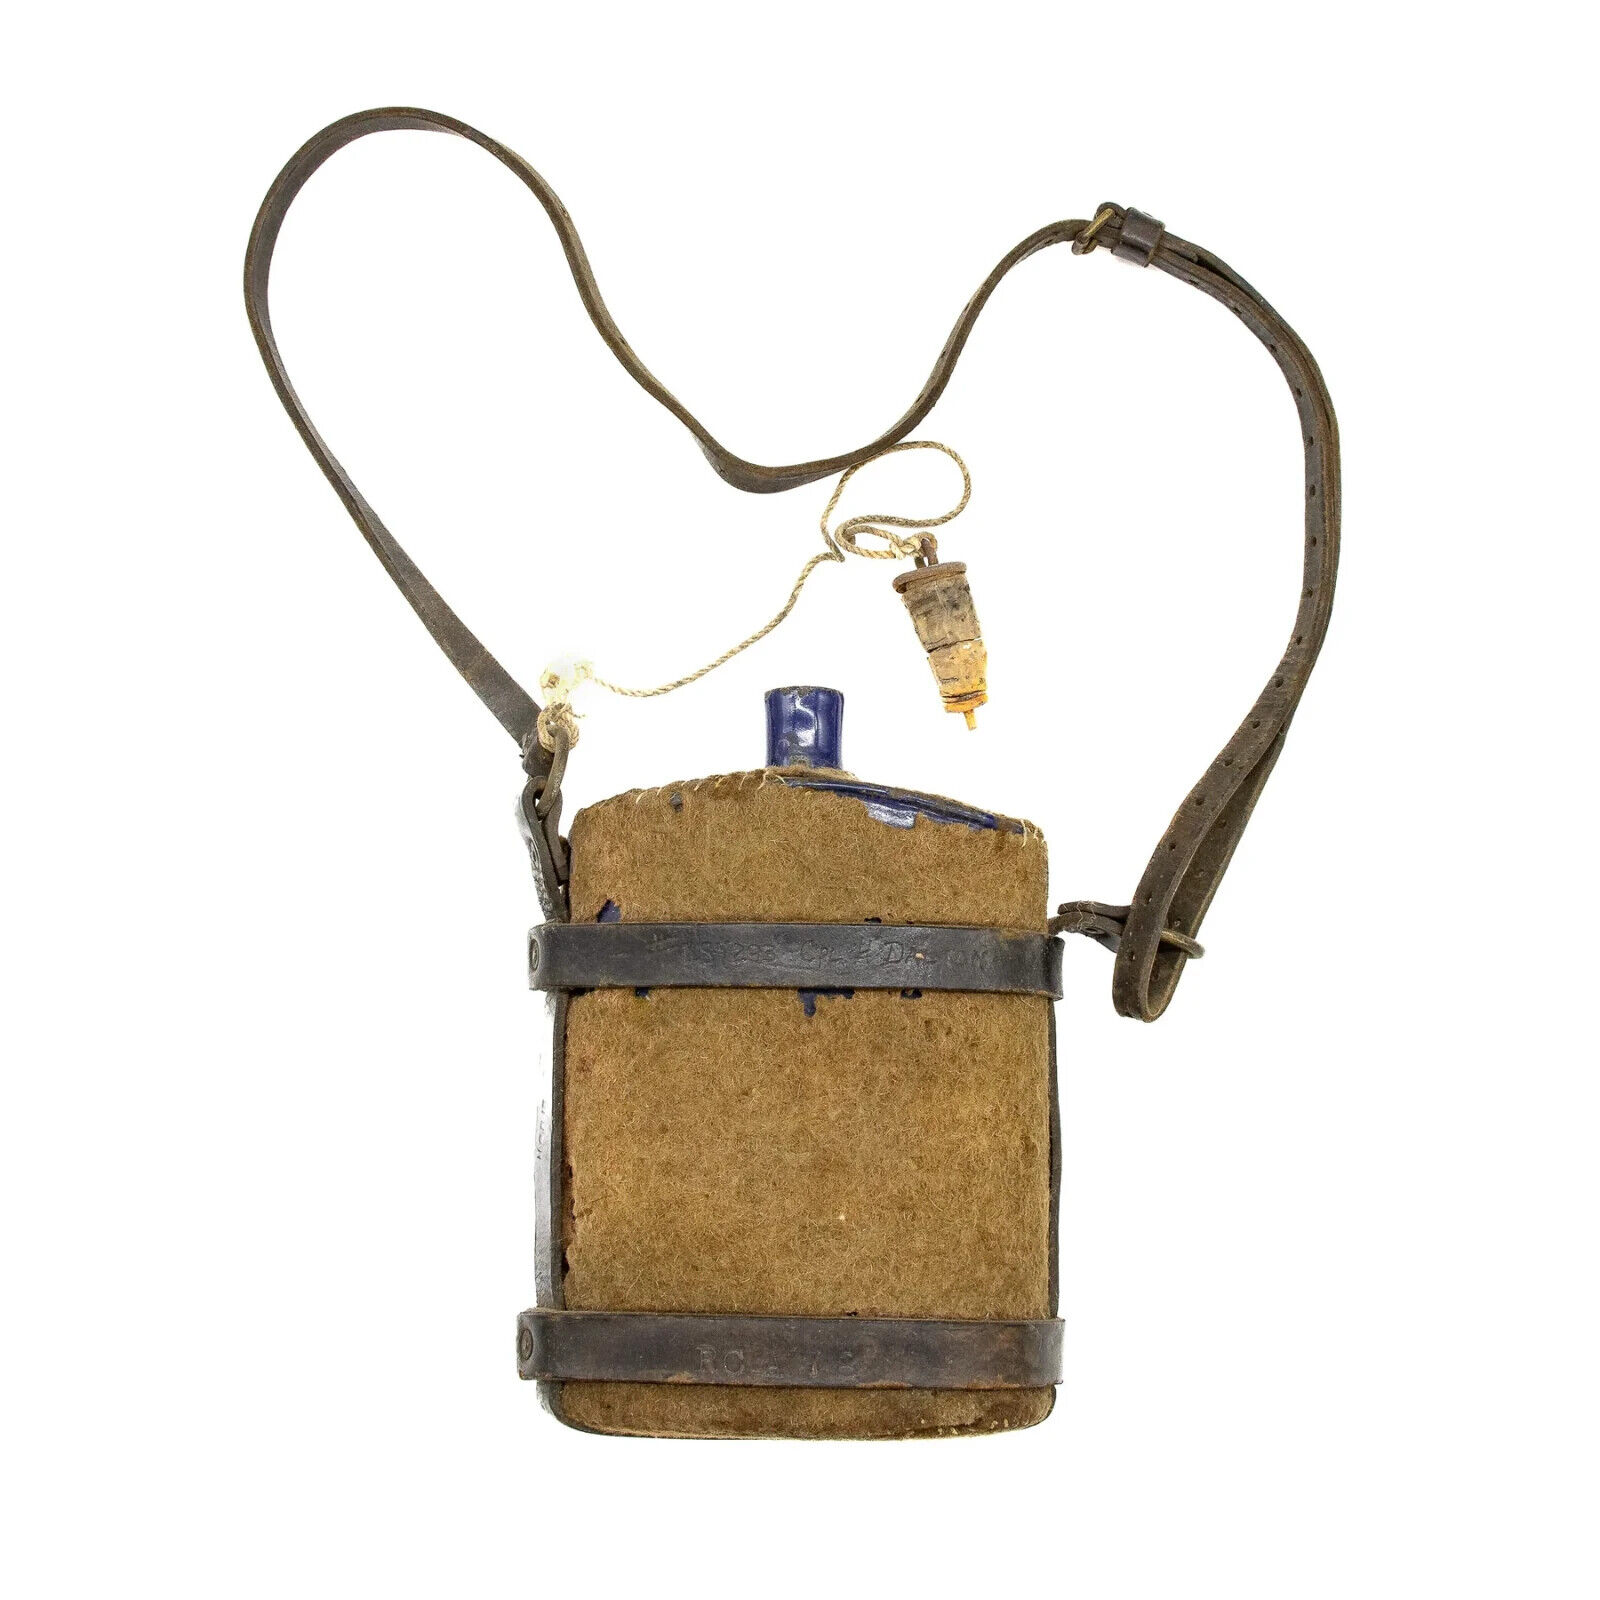 NAMED WWI Canadian Canteen with Original Wool Wrap & Leather Harness